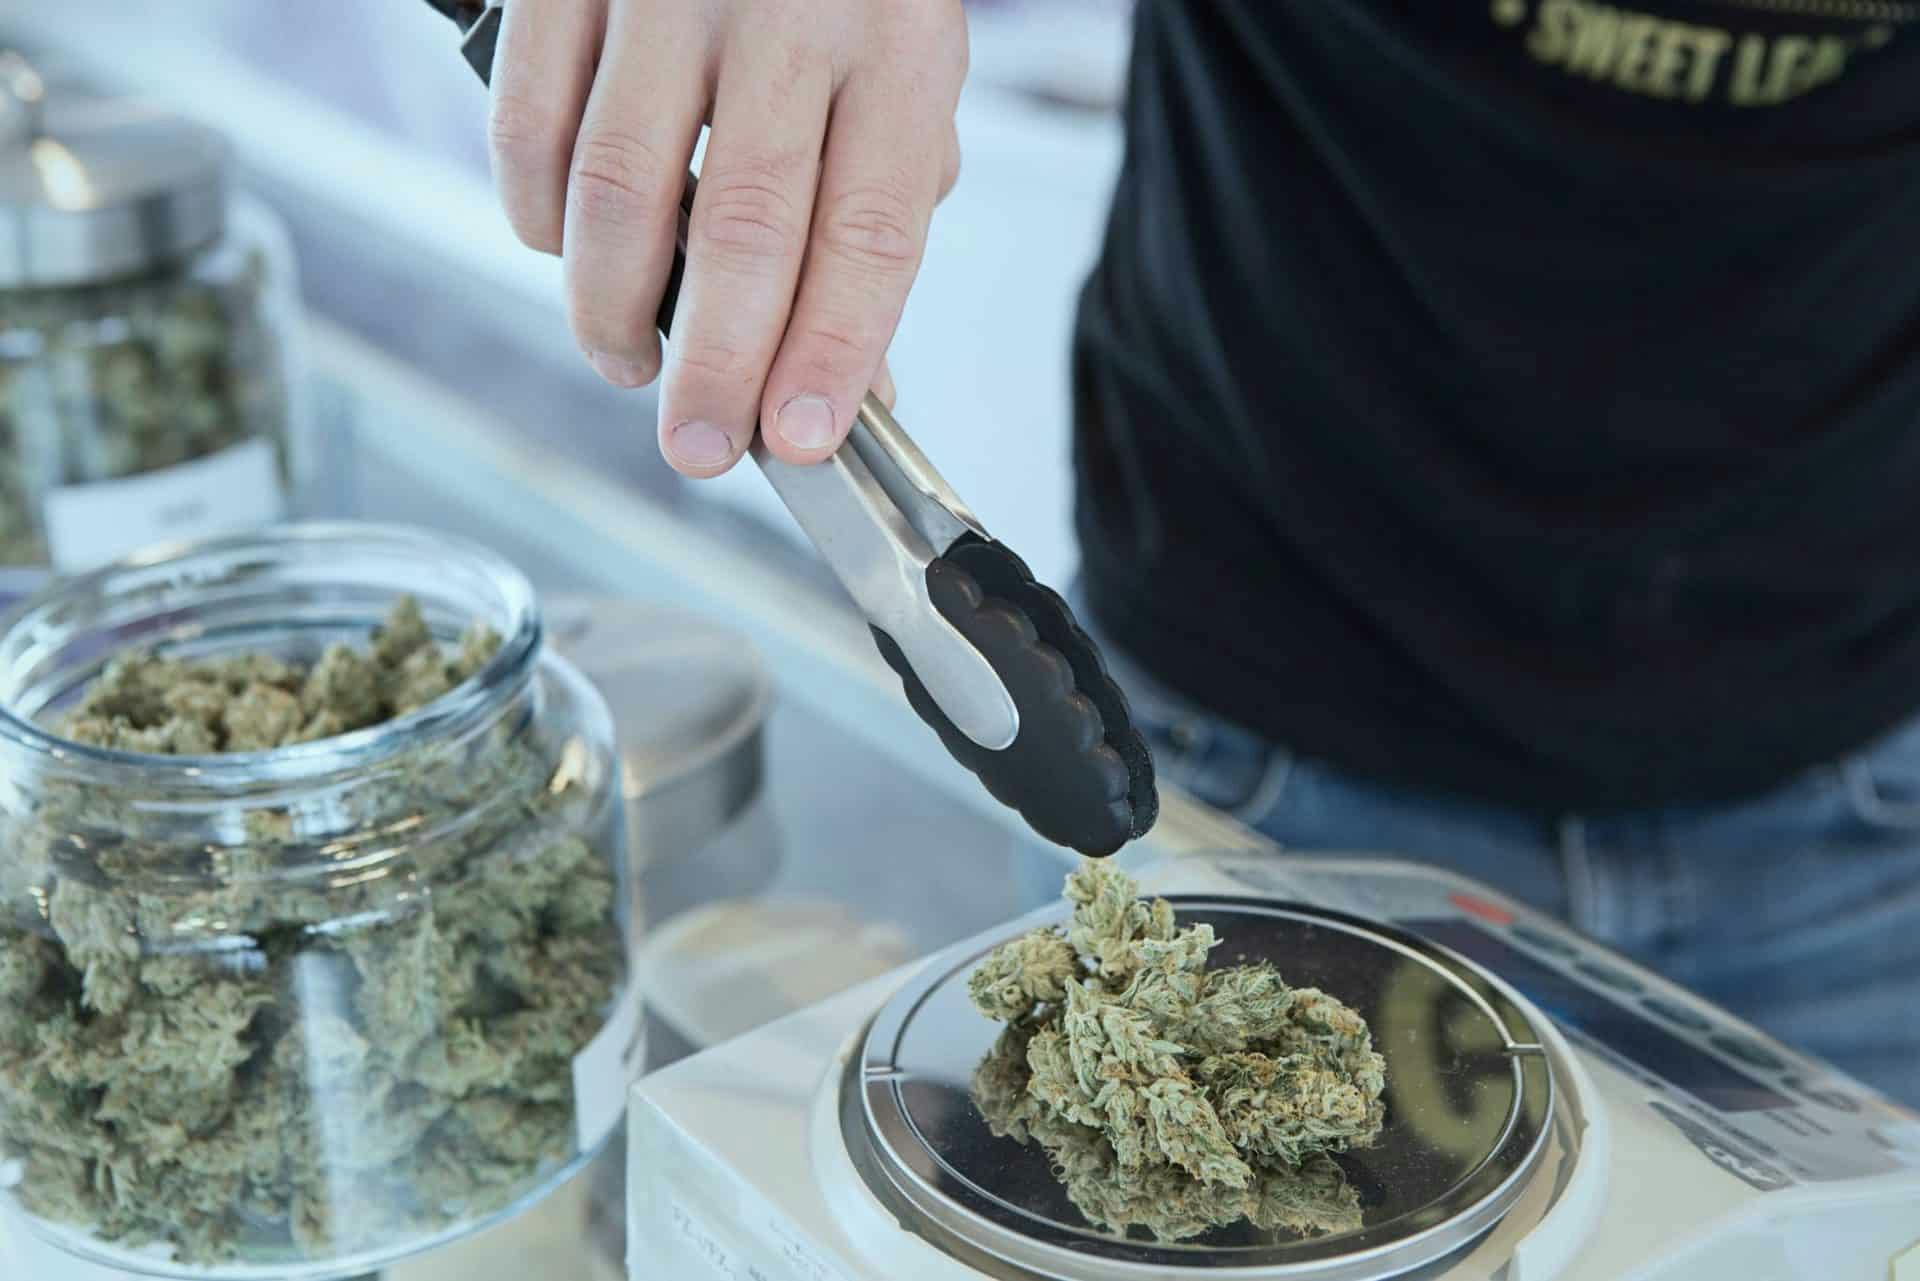 Budtender weighing weed from a glass container